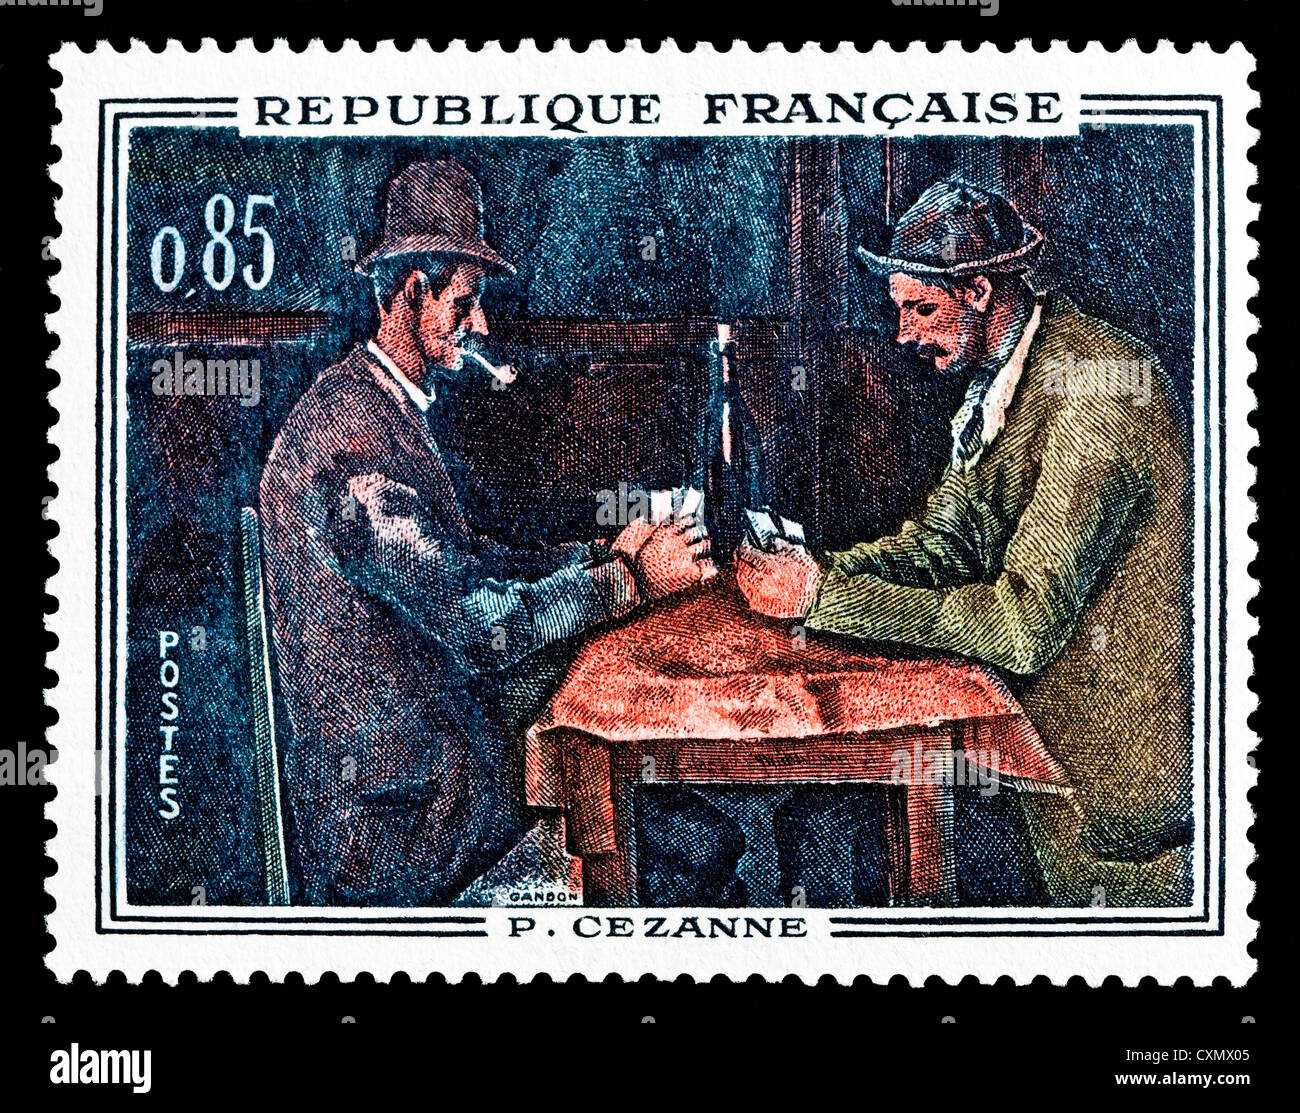 Unused 1962 French postage stamp depicting painting 'Les Jouers de Cartes' / The Card Players by Paul Cézanne. Stock Photo